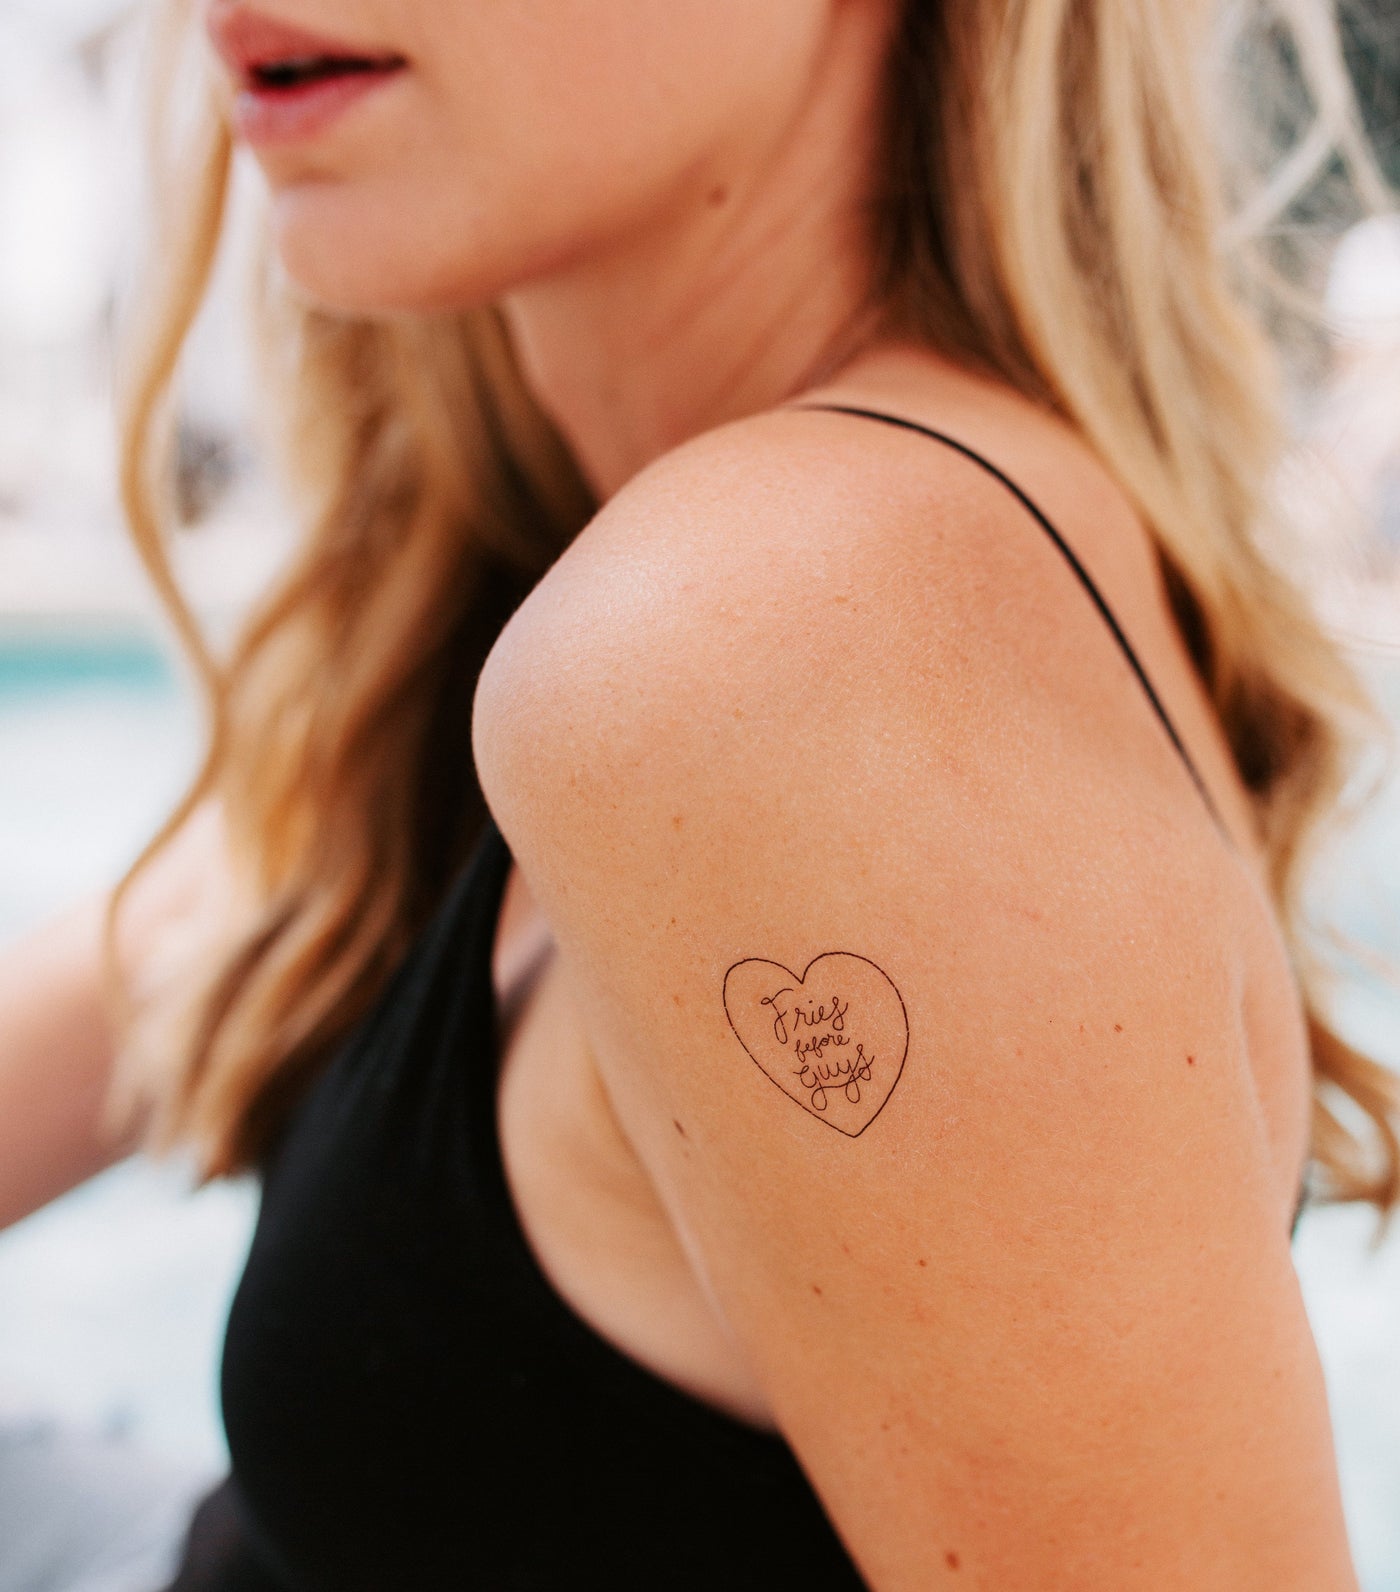 Girl gang tattoo pack - an image showing a temporary tattoo applied to a woman's arm with the text 'fries before guys' encircled by a heart